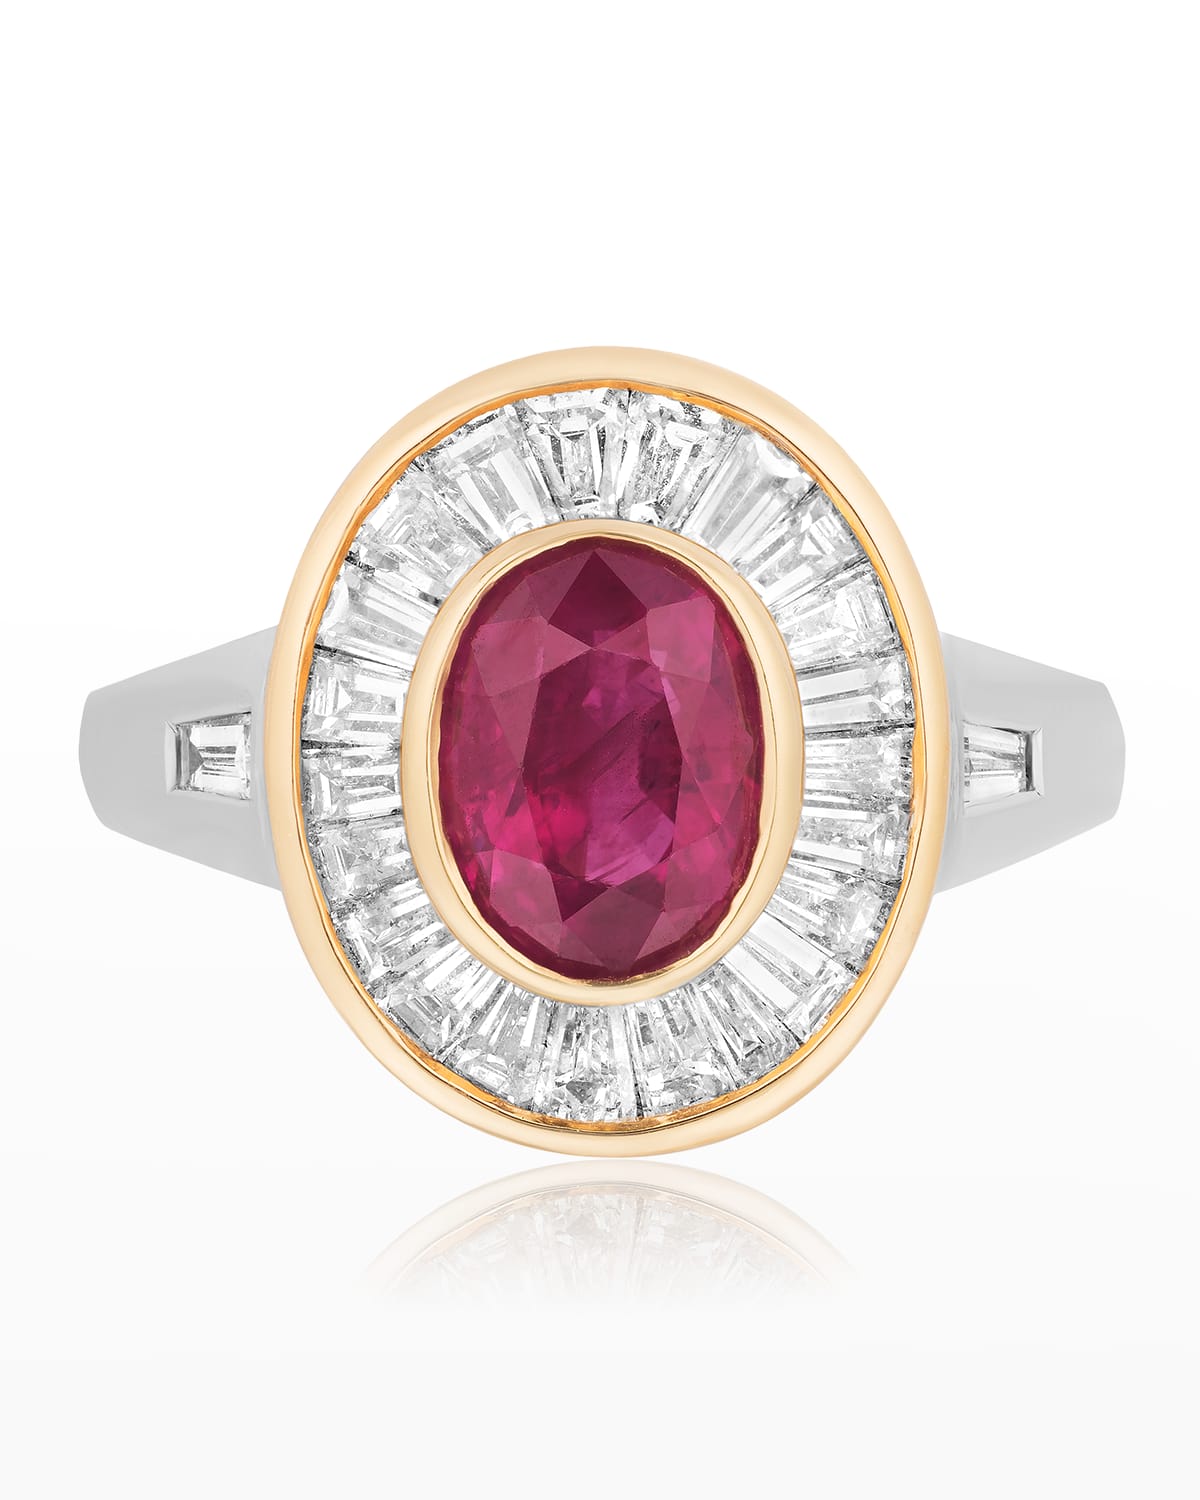 Andreoli Yellow and White Gold Ruby and Diamond Ring